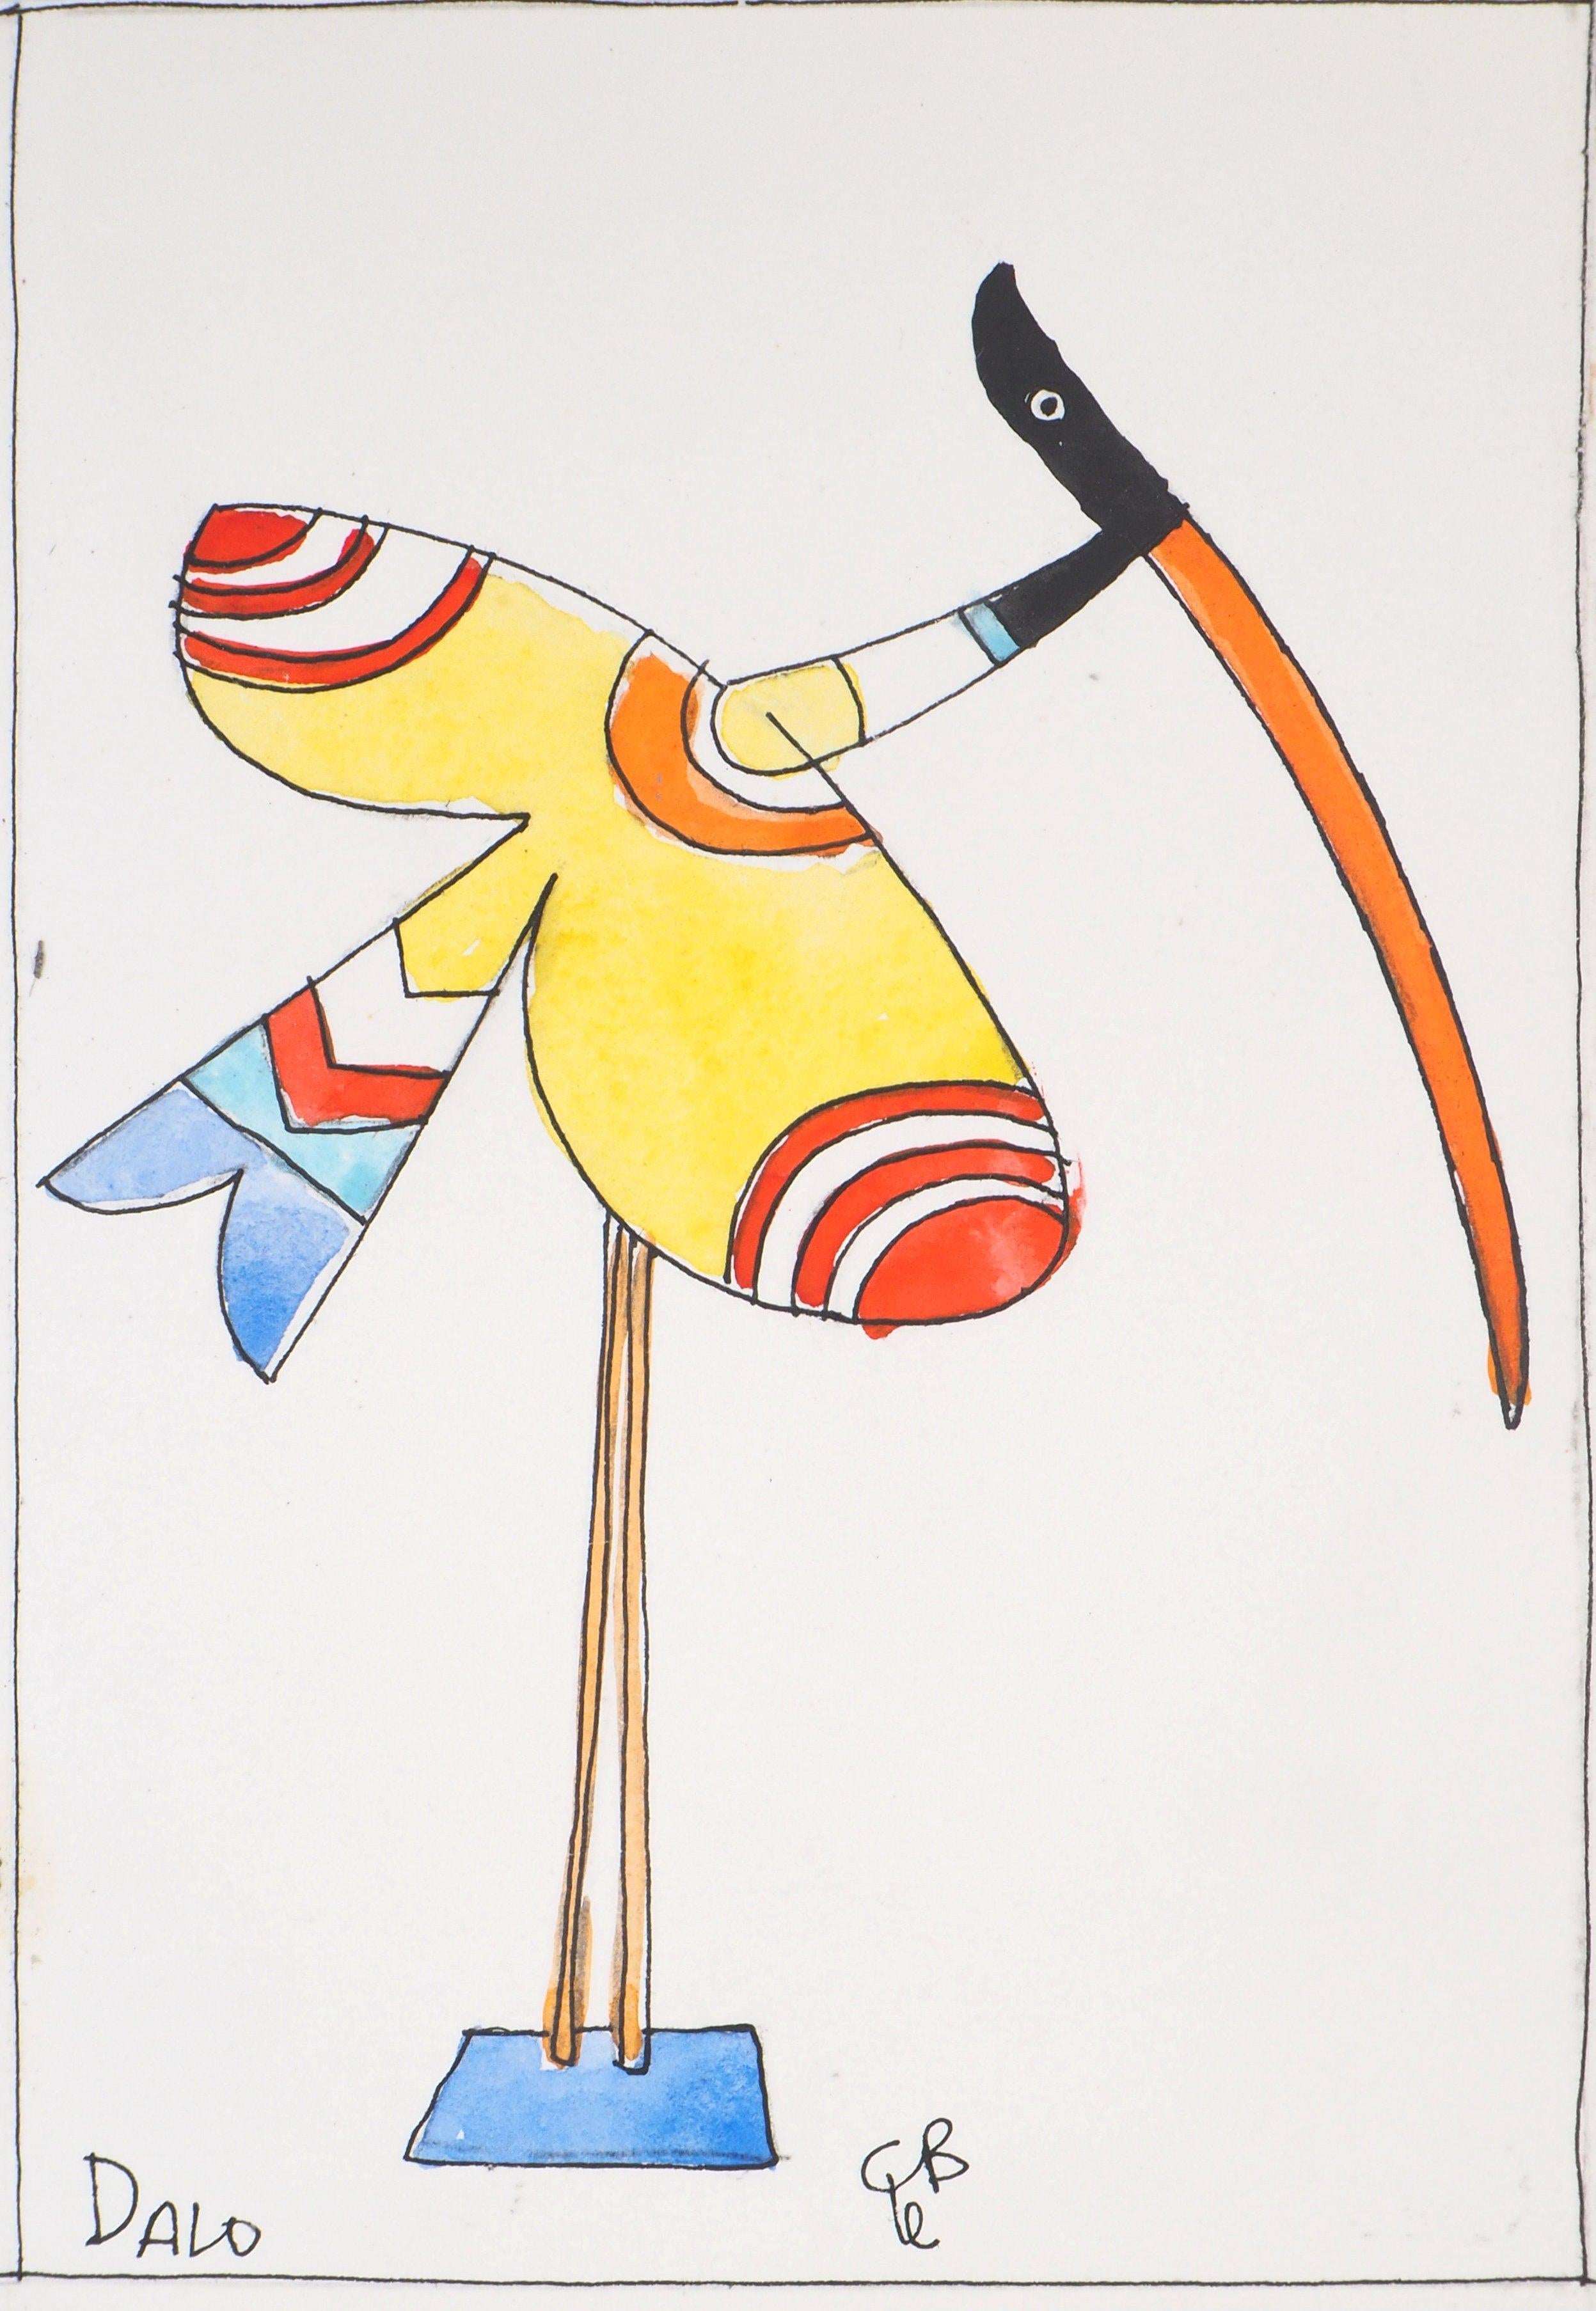 Charles le Bars
Colorful birds

Original watercolor
Handsigned
On heavy paper 15 x 52 cm (c. 6 x 21 inch)

Excellent condition